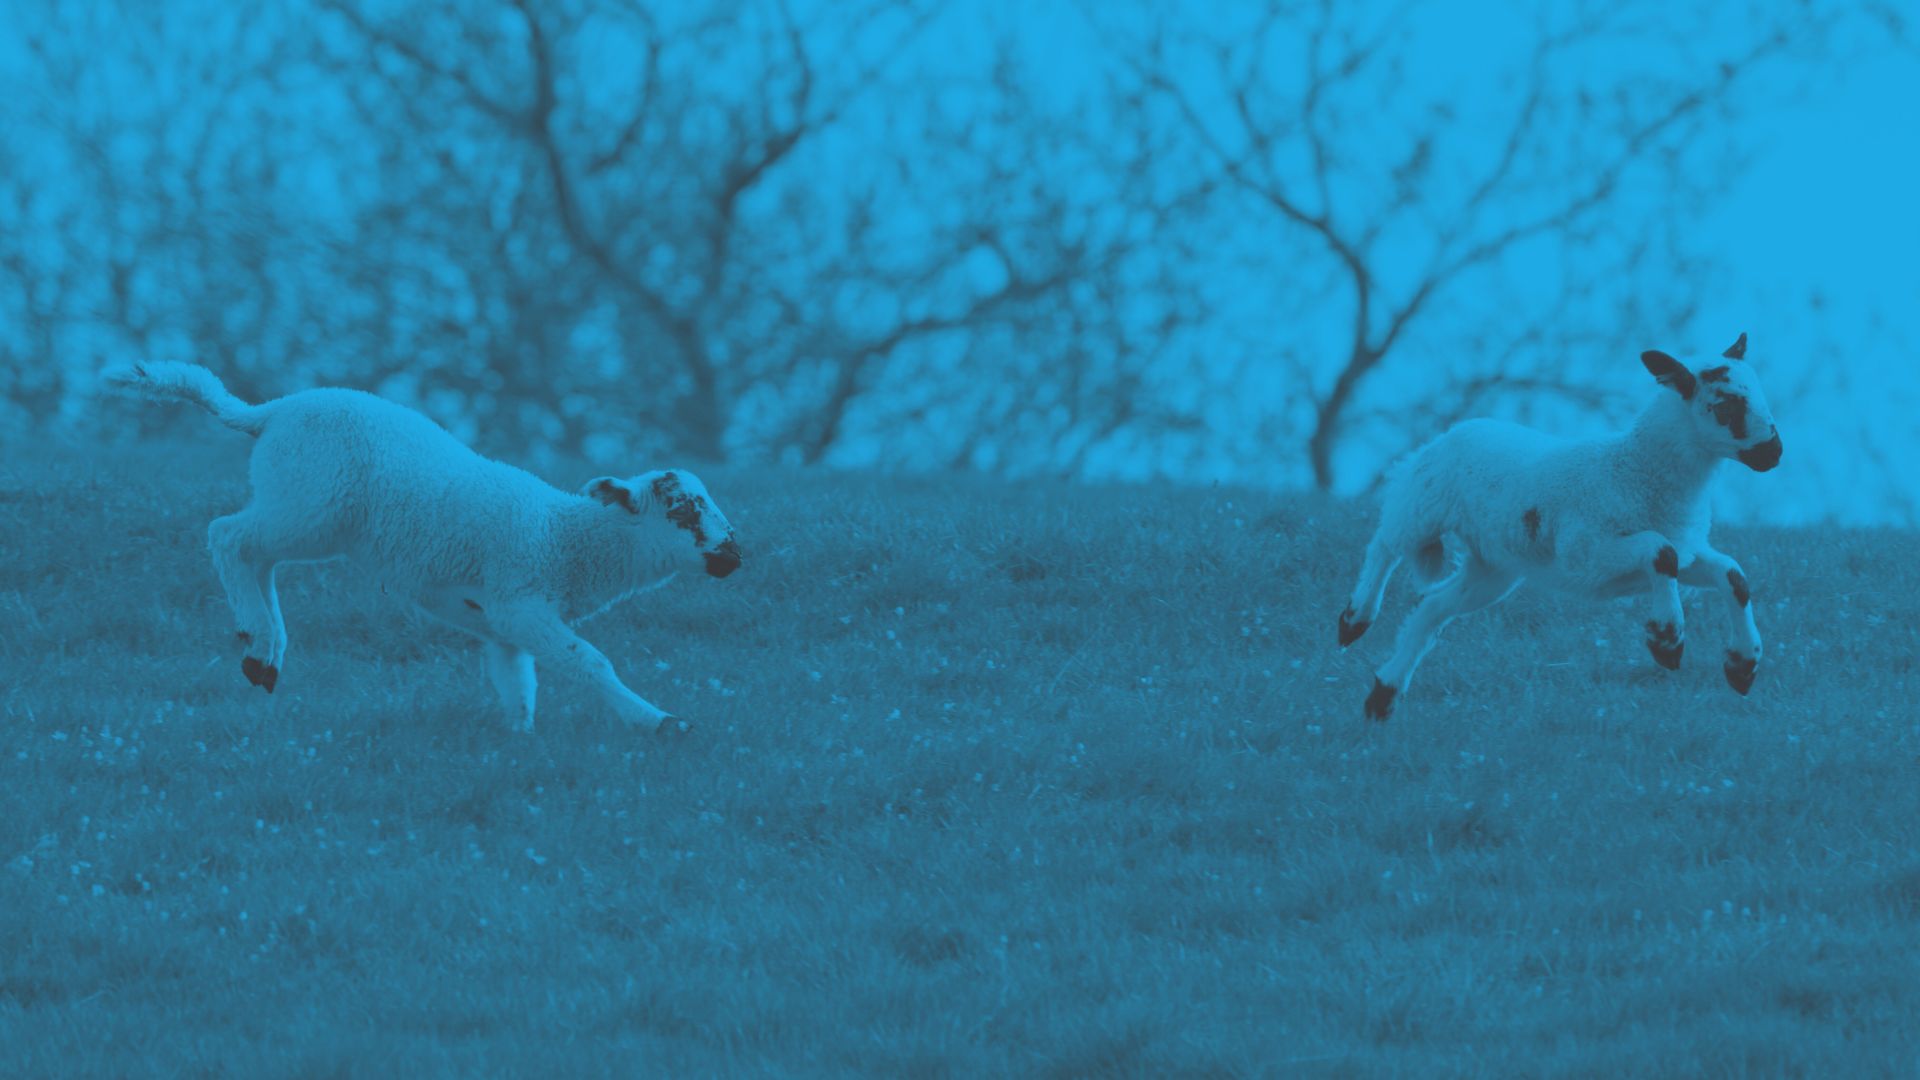 A photograph of lambs jumping in the countryside - Opportunities for children at Oval Learning schools to connect with nature